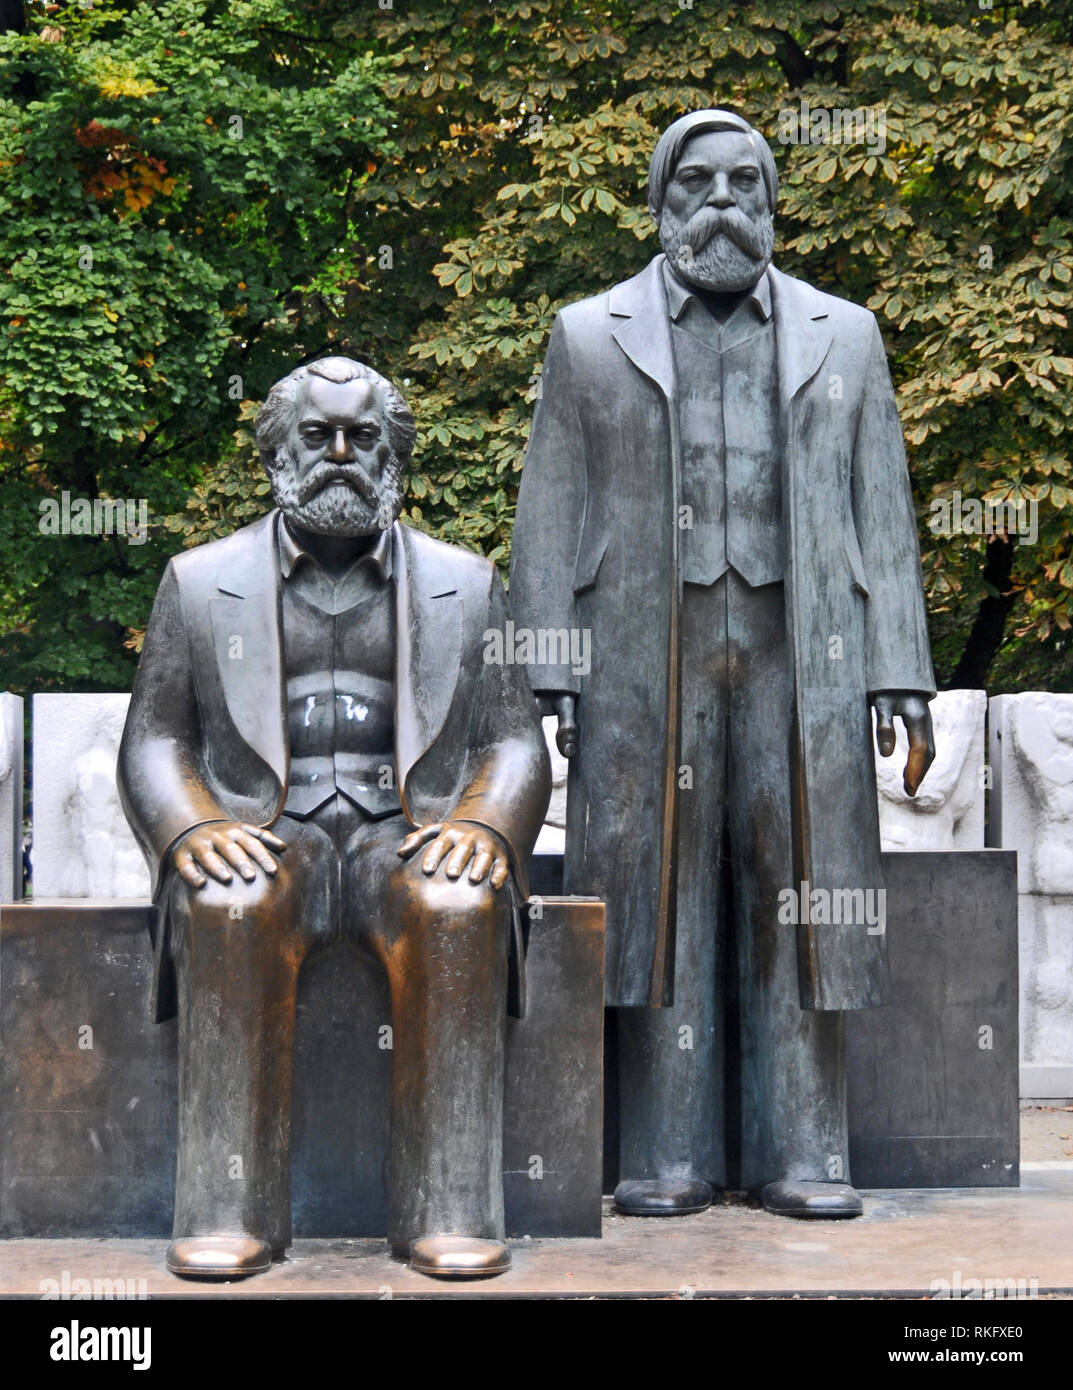 Around Berlin - Monument of Karl Marx & Fredrich Engels, the fathers of Communism. Stock Photo